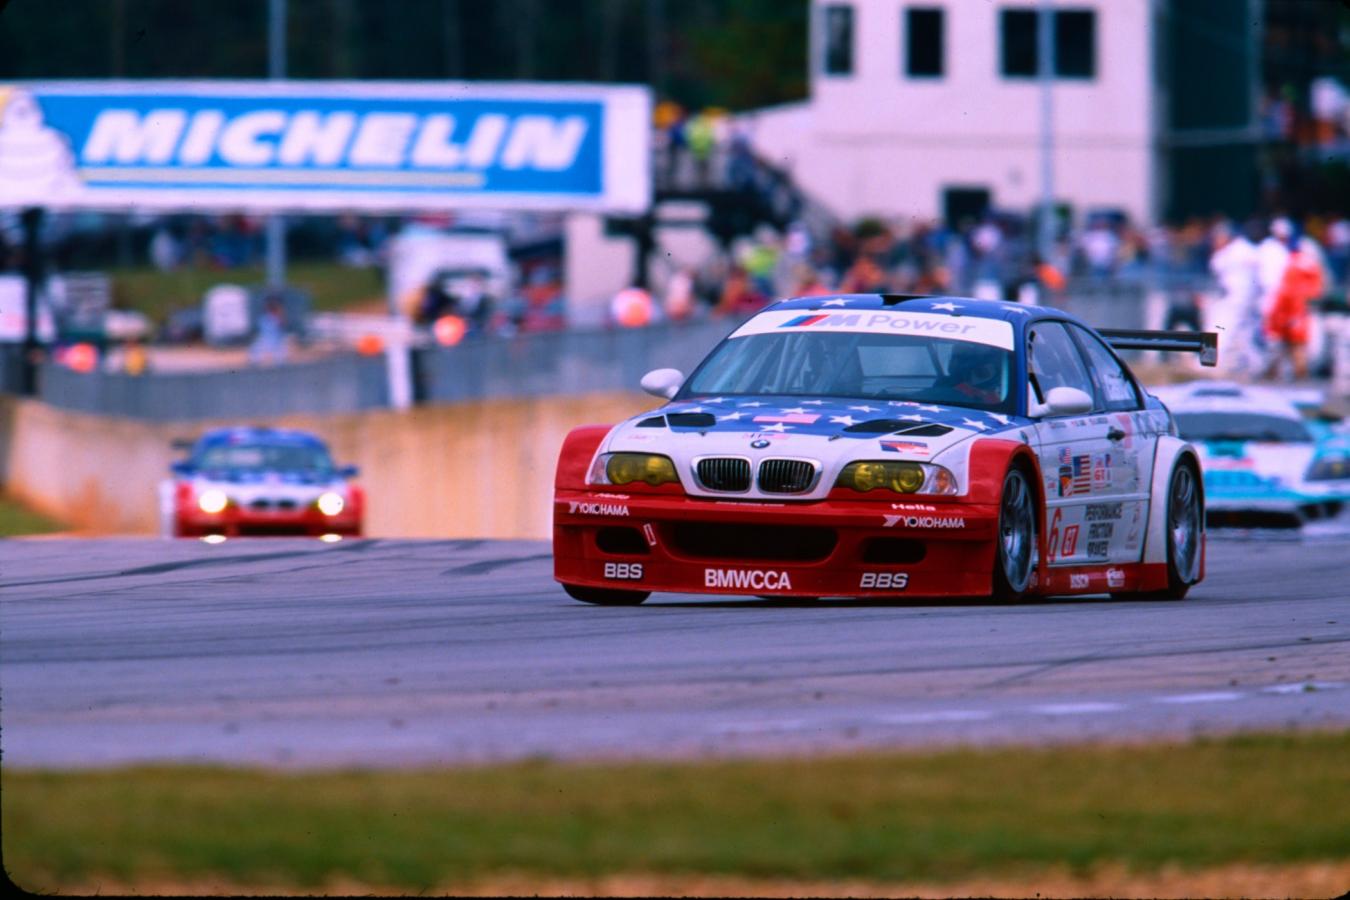 Click image for larger version  Name:	2001-BMW-E46-M3-GTR-V8-ALMS-American-Le-Mans-Series-Press.BMW-Group-4.jpg Views:	0 Size:	114.4 KB ID:	250450